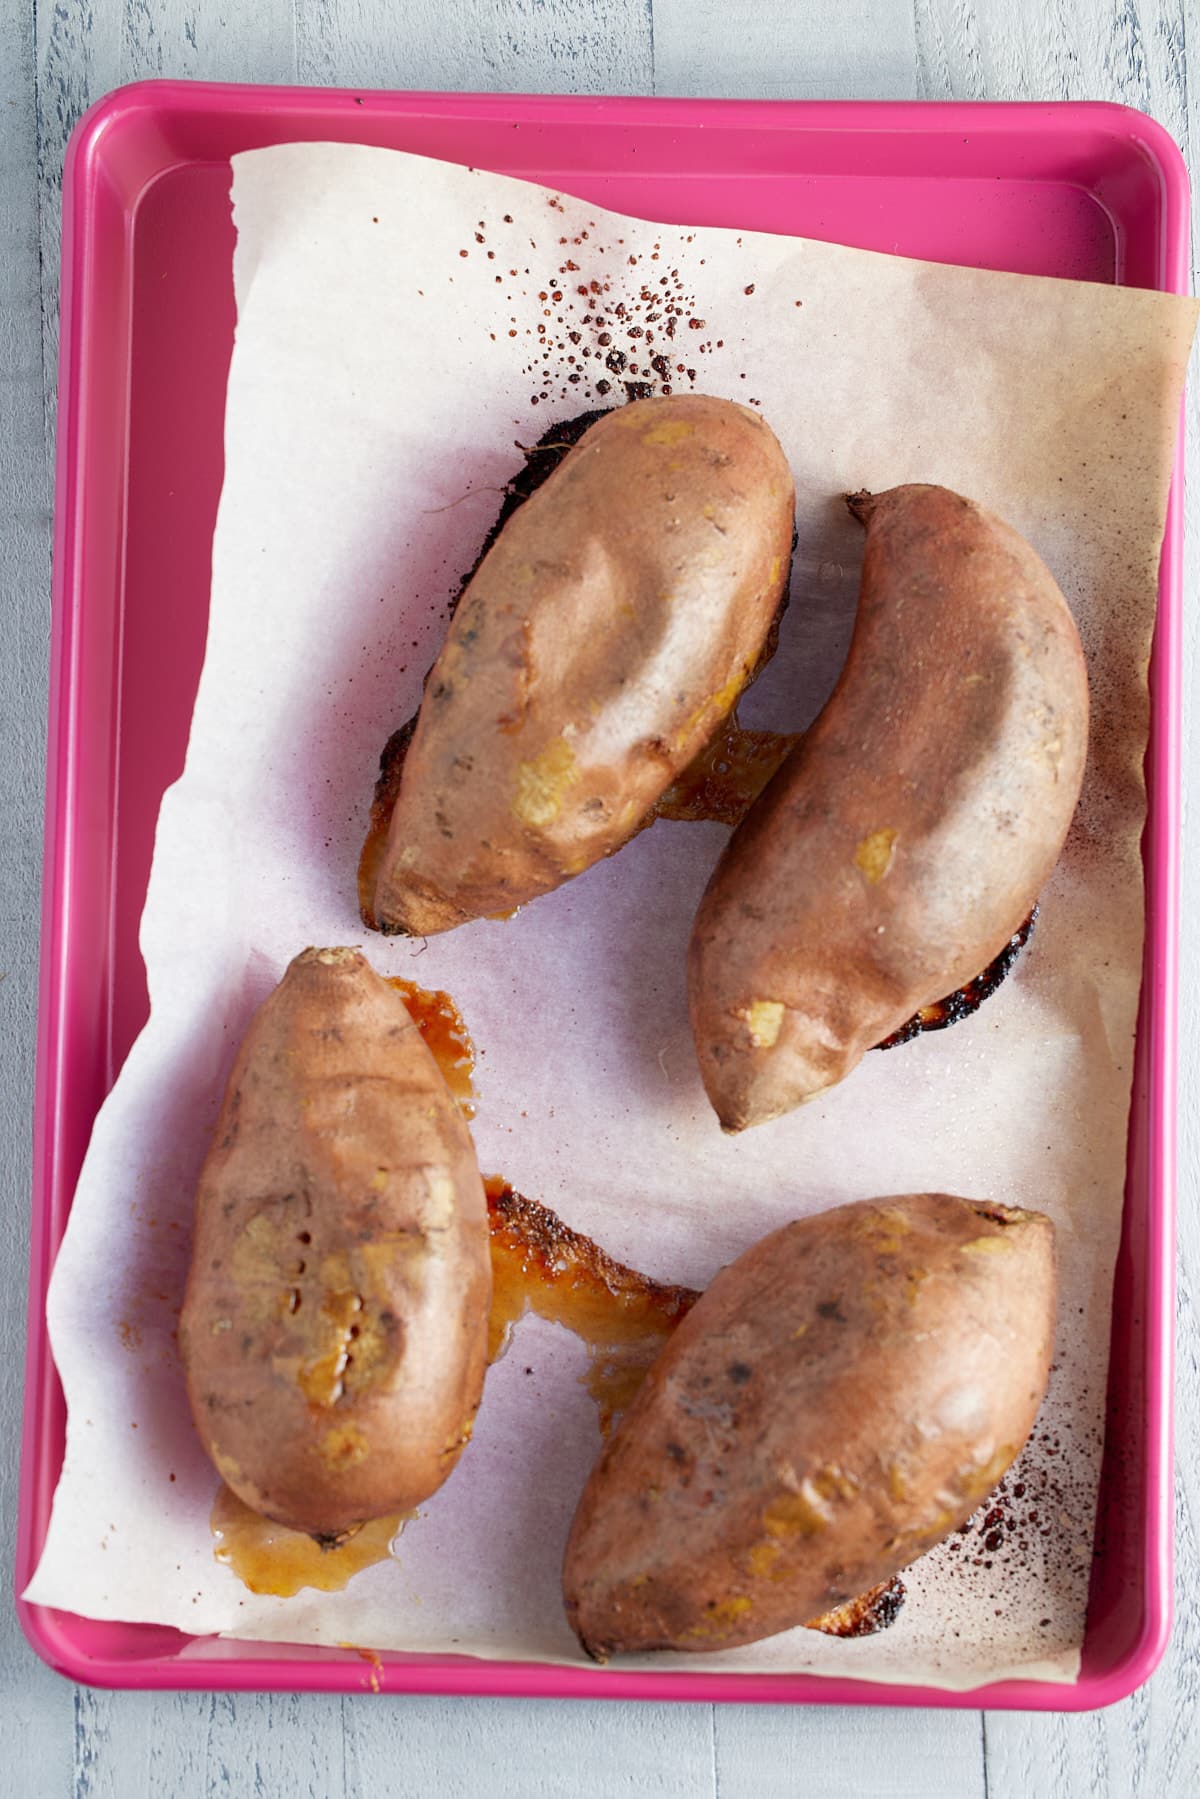 four baked sweet potatoes on a pink baking tray lined with baking parchment